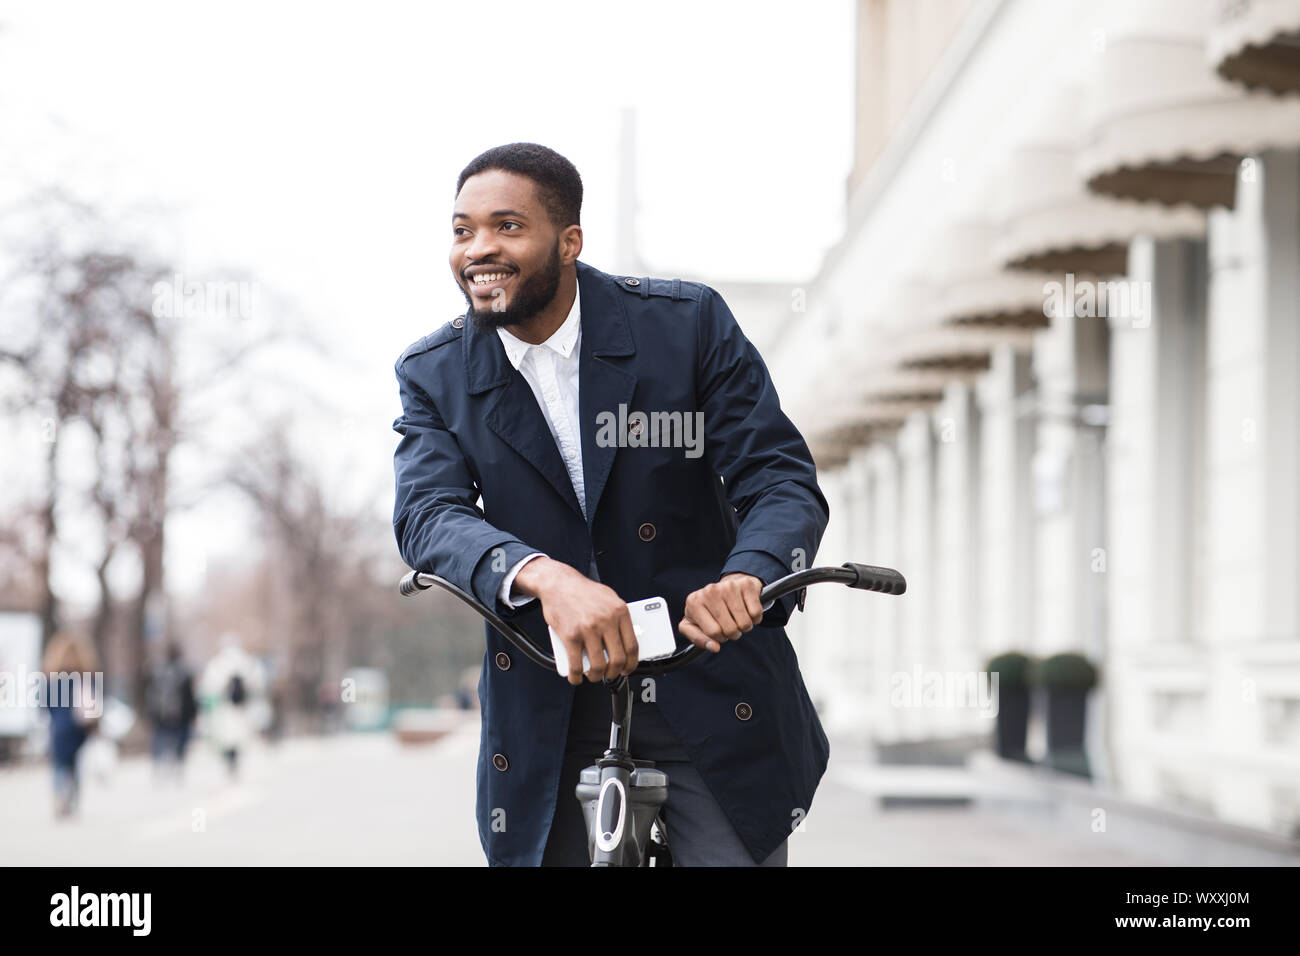 African american man in suit riding on bike to work Stock Photo